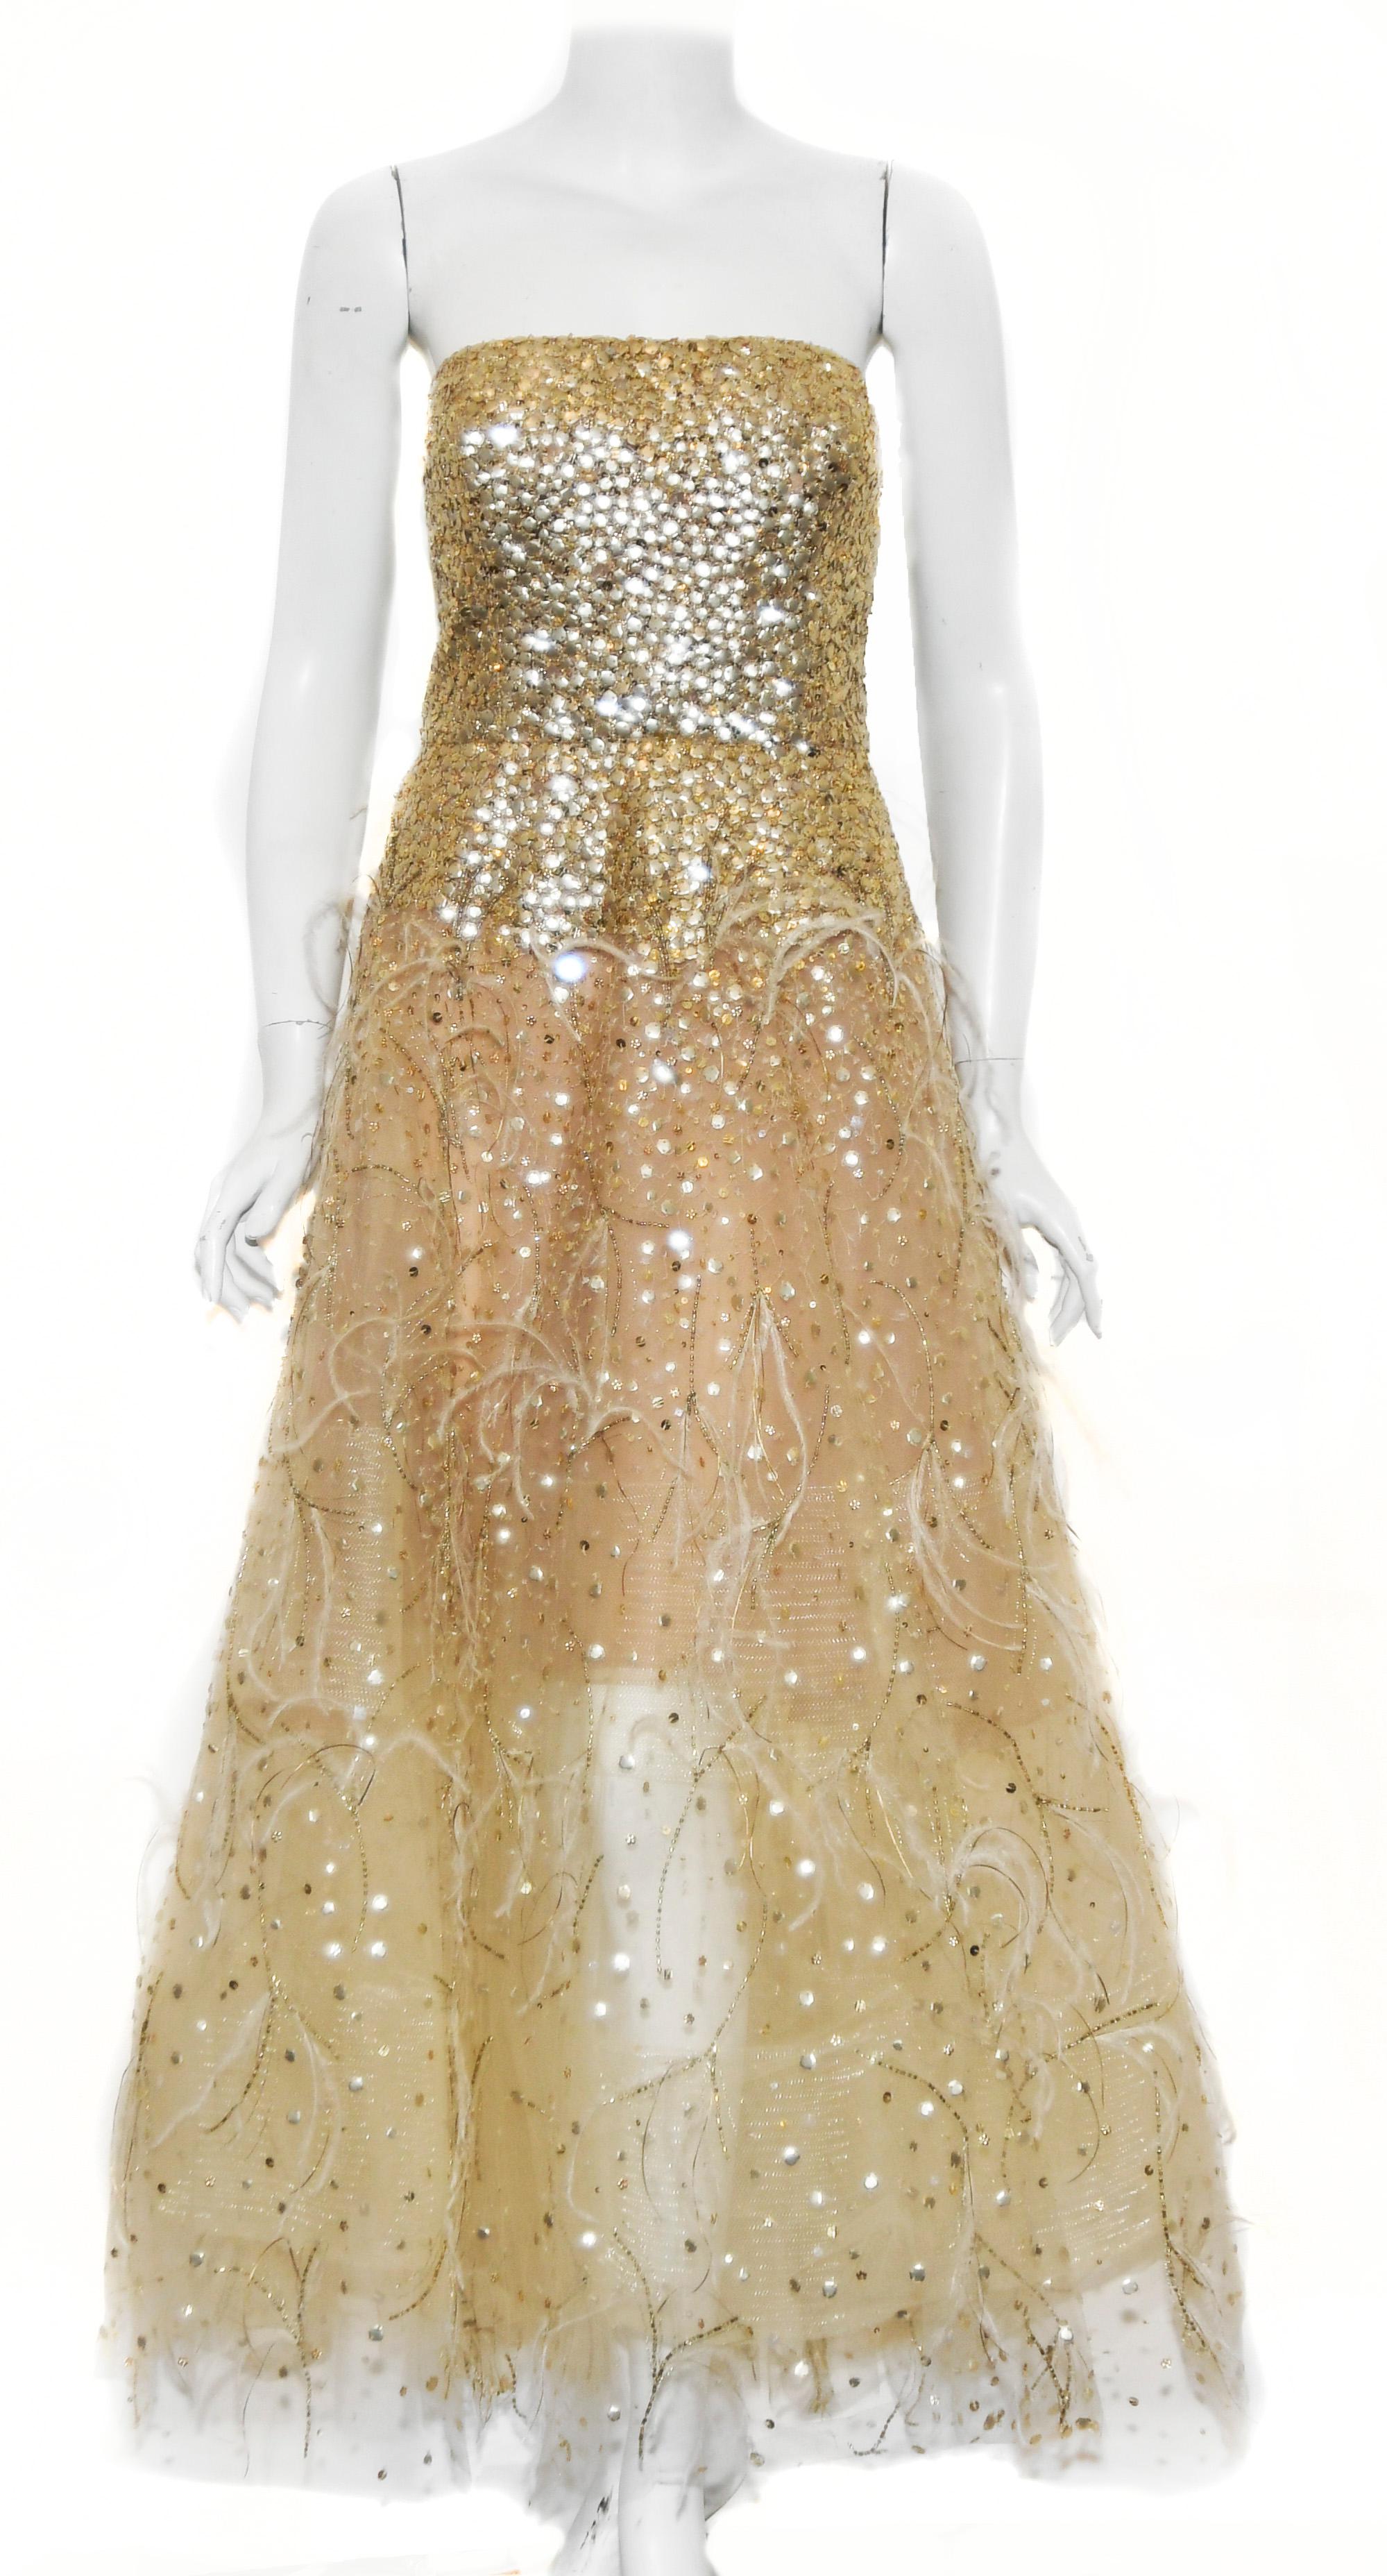 Oscar de la Renta gold tone sequin strapless gown incorporating ostrich feather accents from the waist down to the hem.  The bodice of this gown is bursting with sequins and the sequins diminish as it cascades down the skirt.  The strapless top